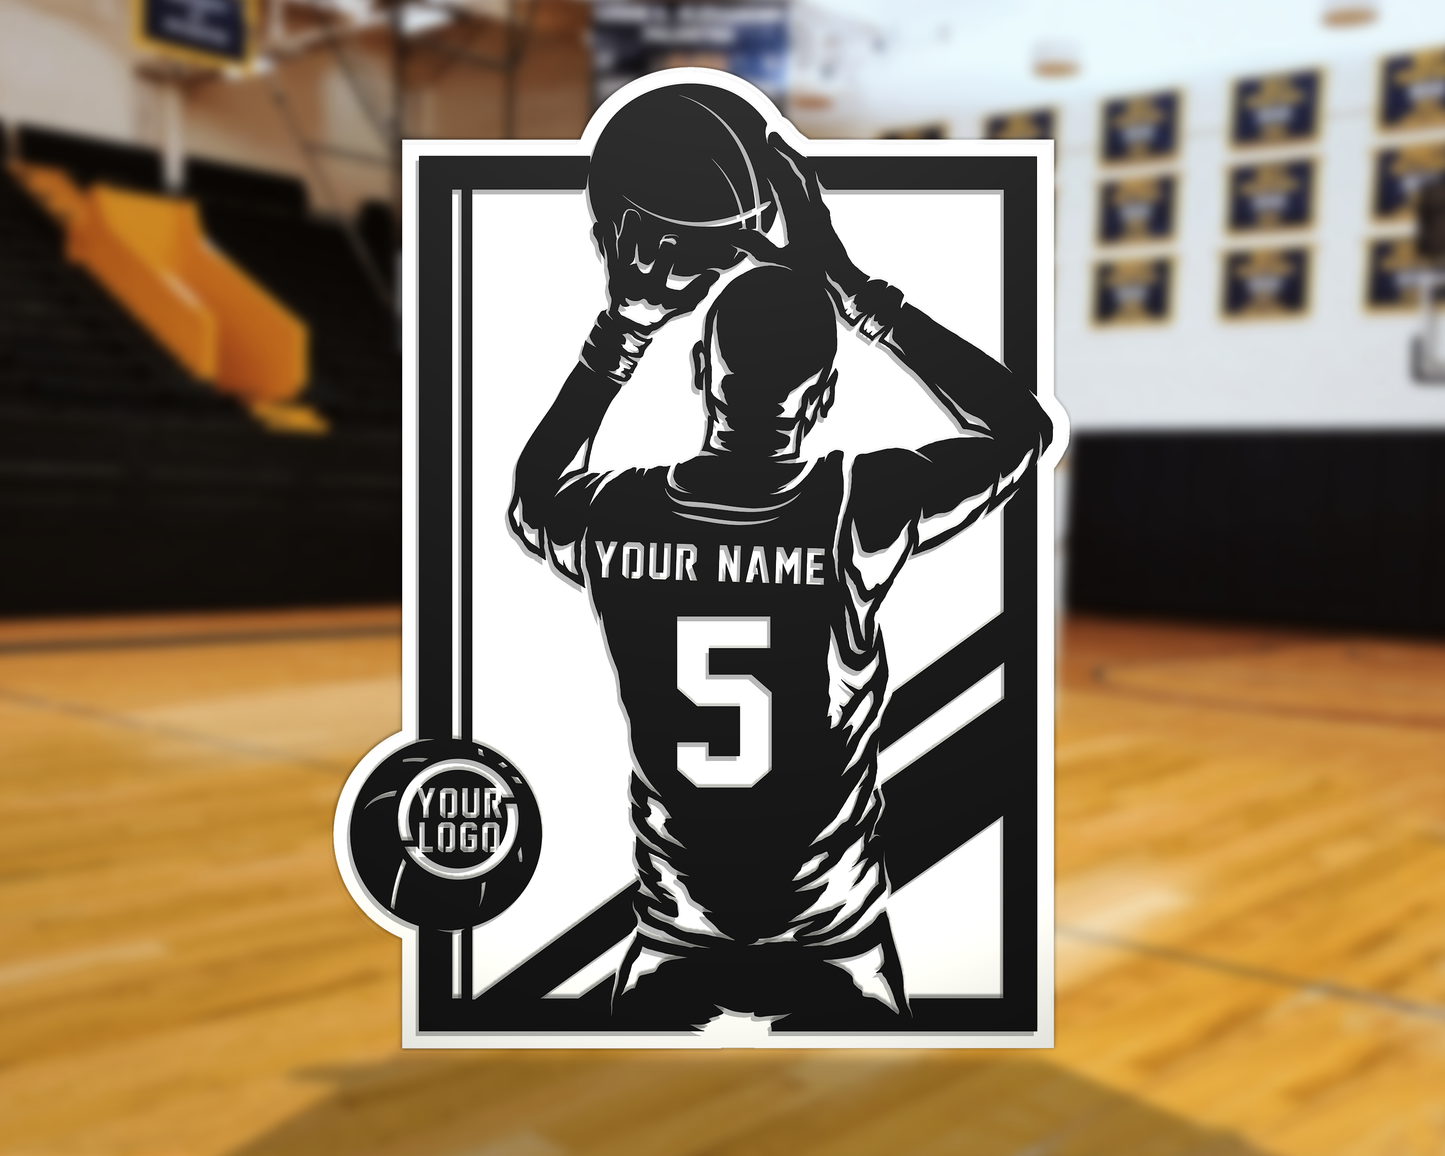 Personalized sport signs